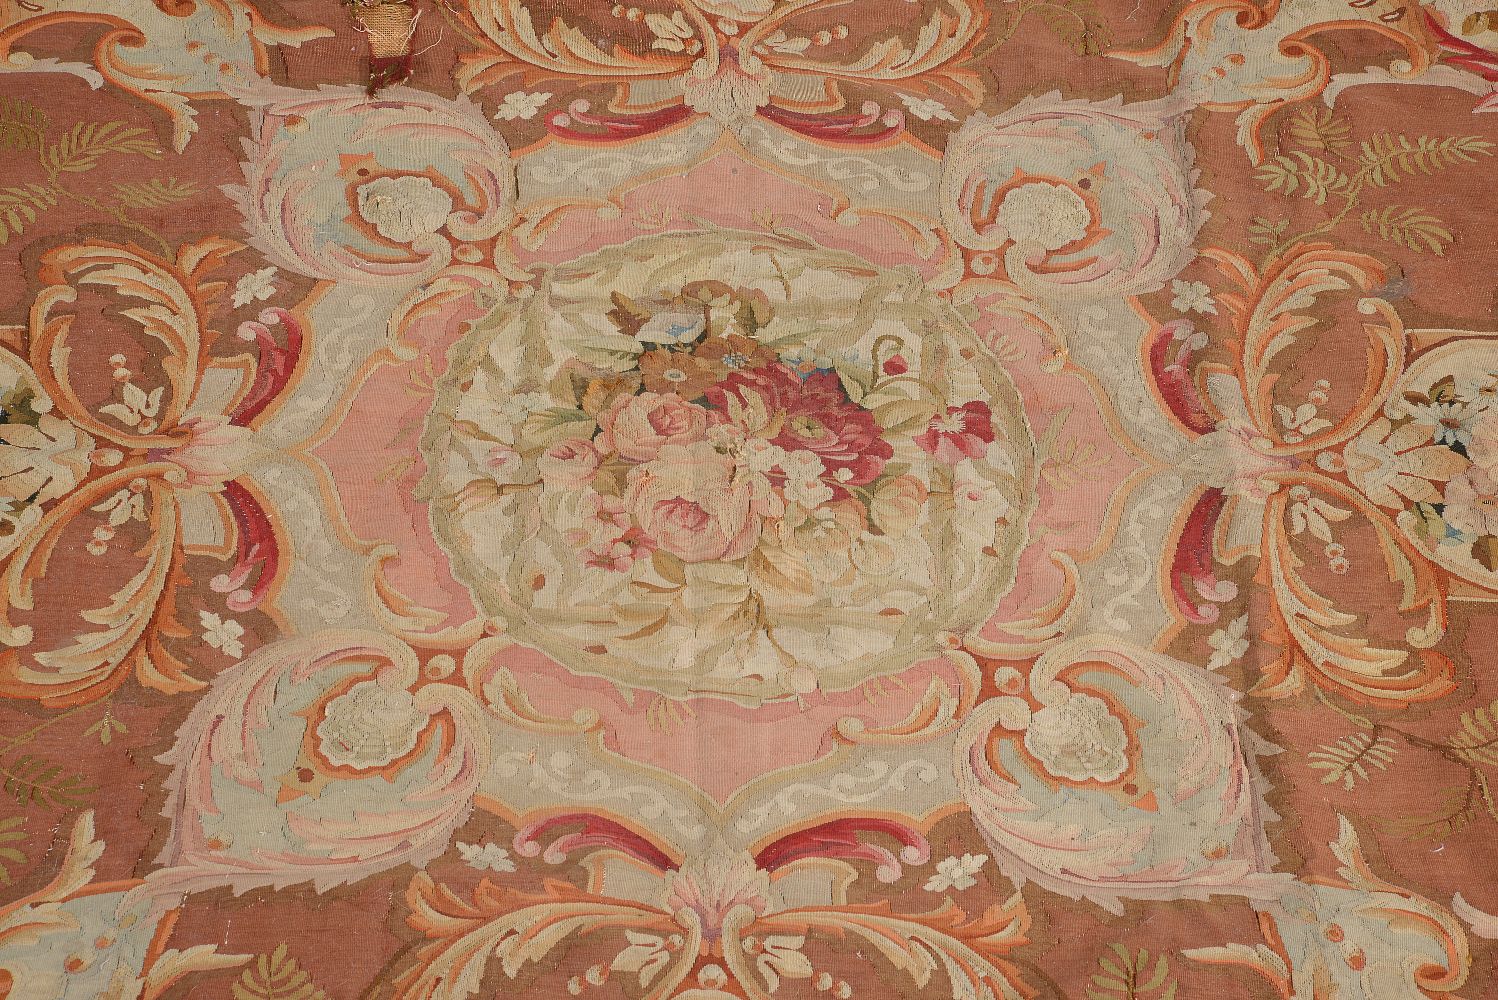 A French woven panel in Aubusson style - Image 2 of 2